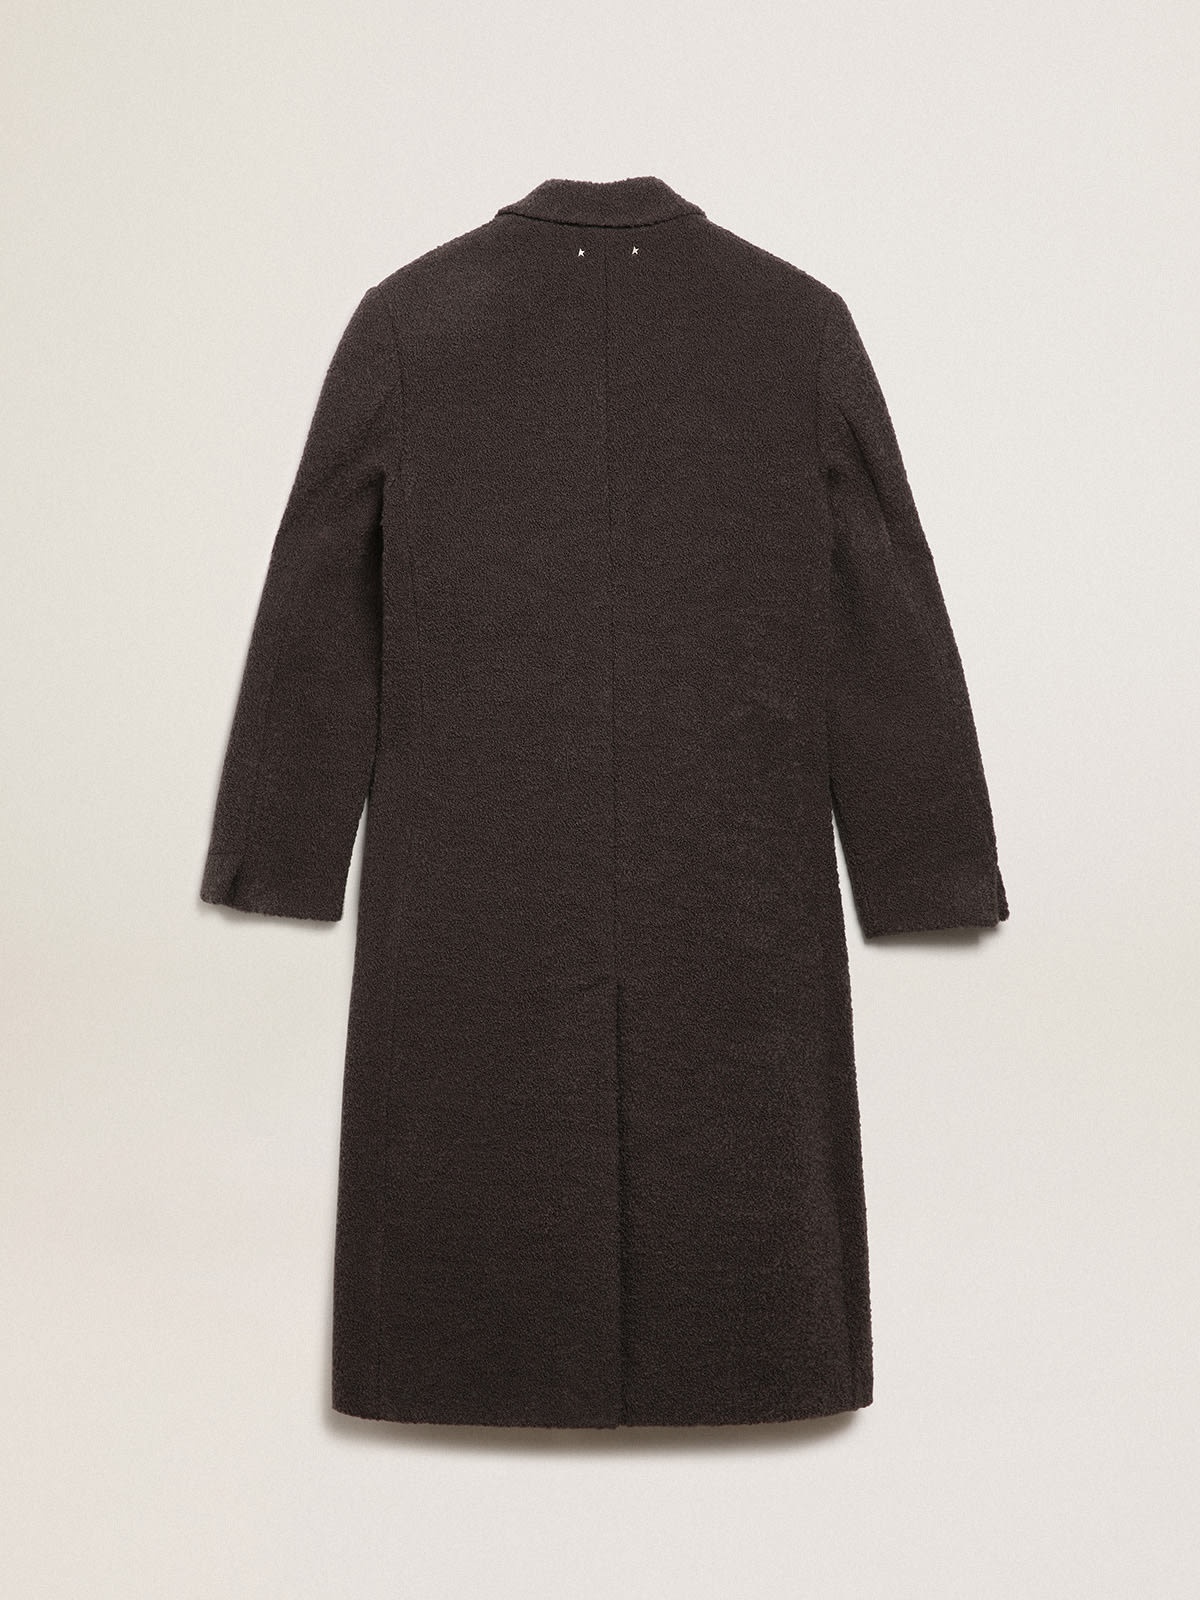 Men's double-breasted coat in licorice-colored bouclé wool - 7